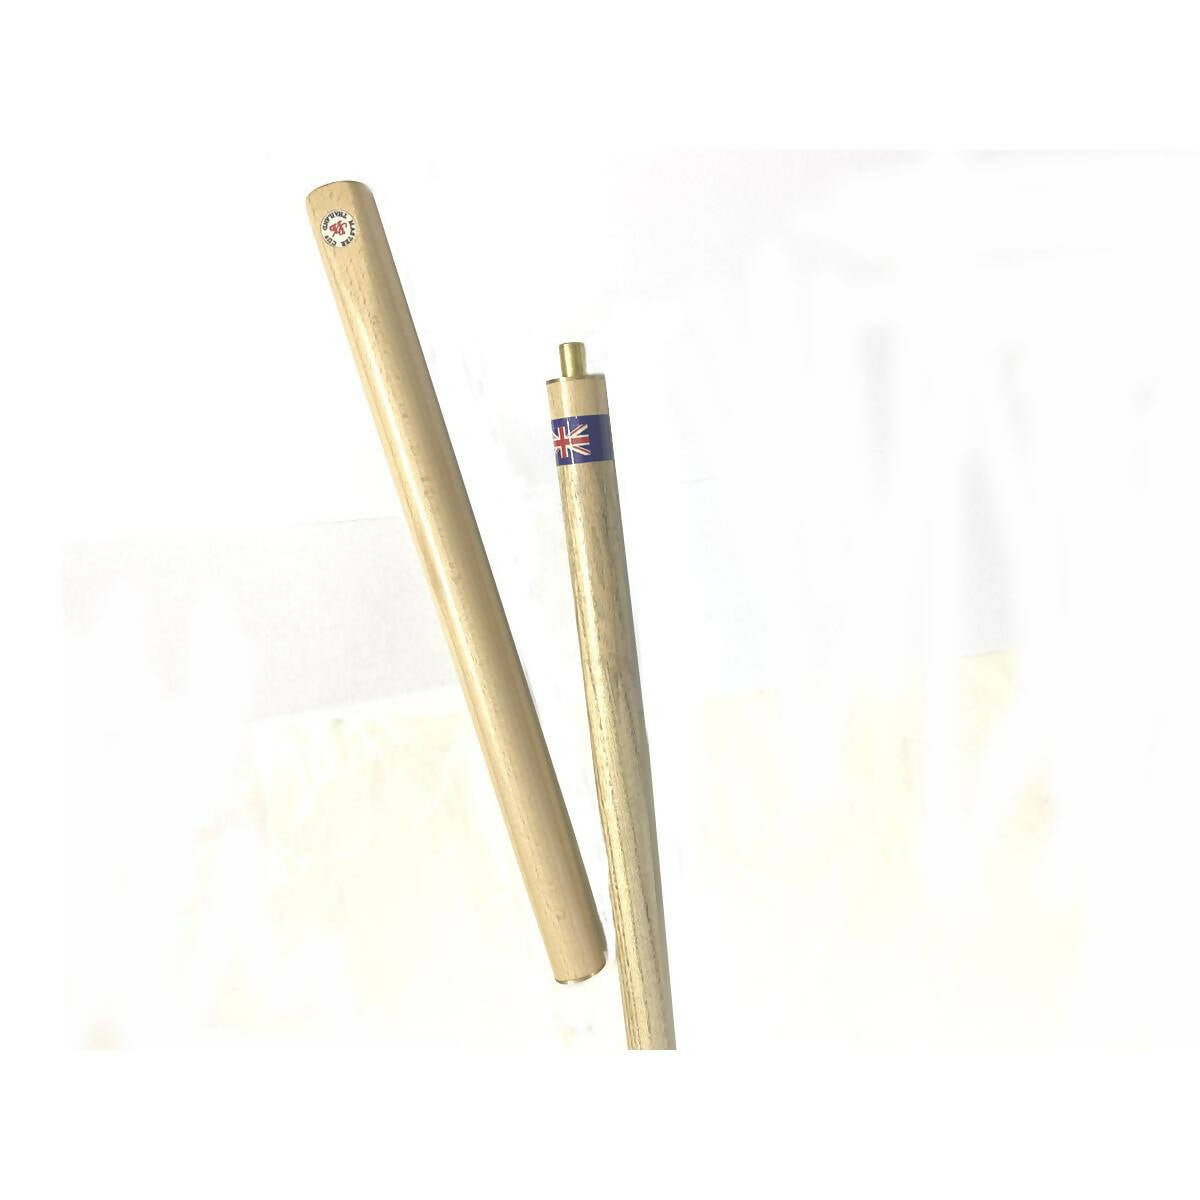 Snooker Billiard Cue Stick 10 mm tip With Bag - Wooden